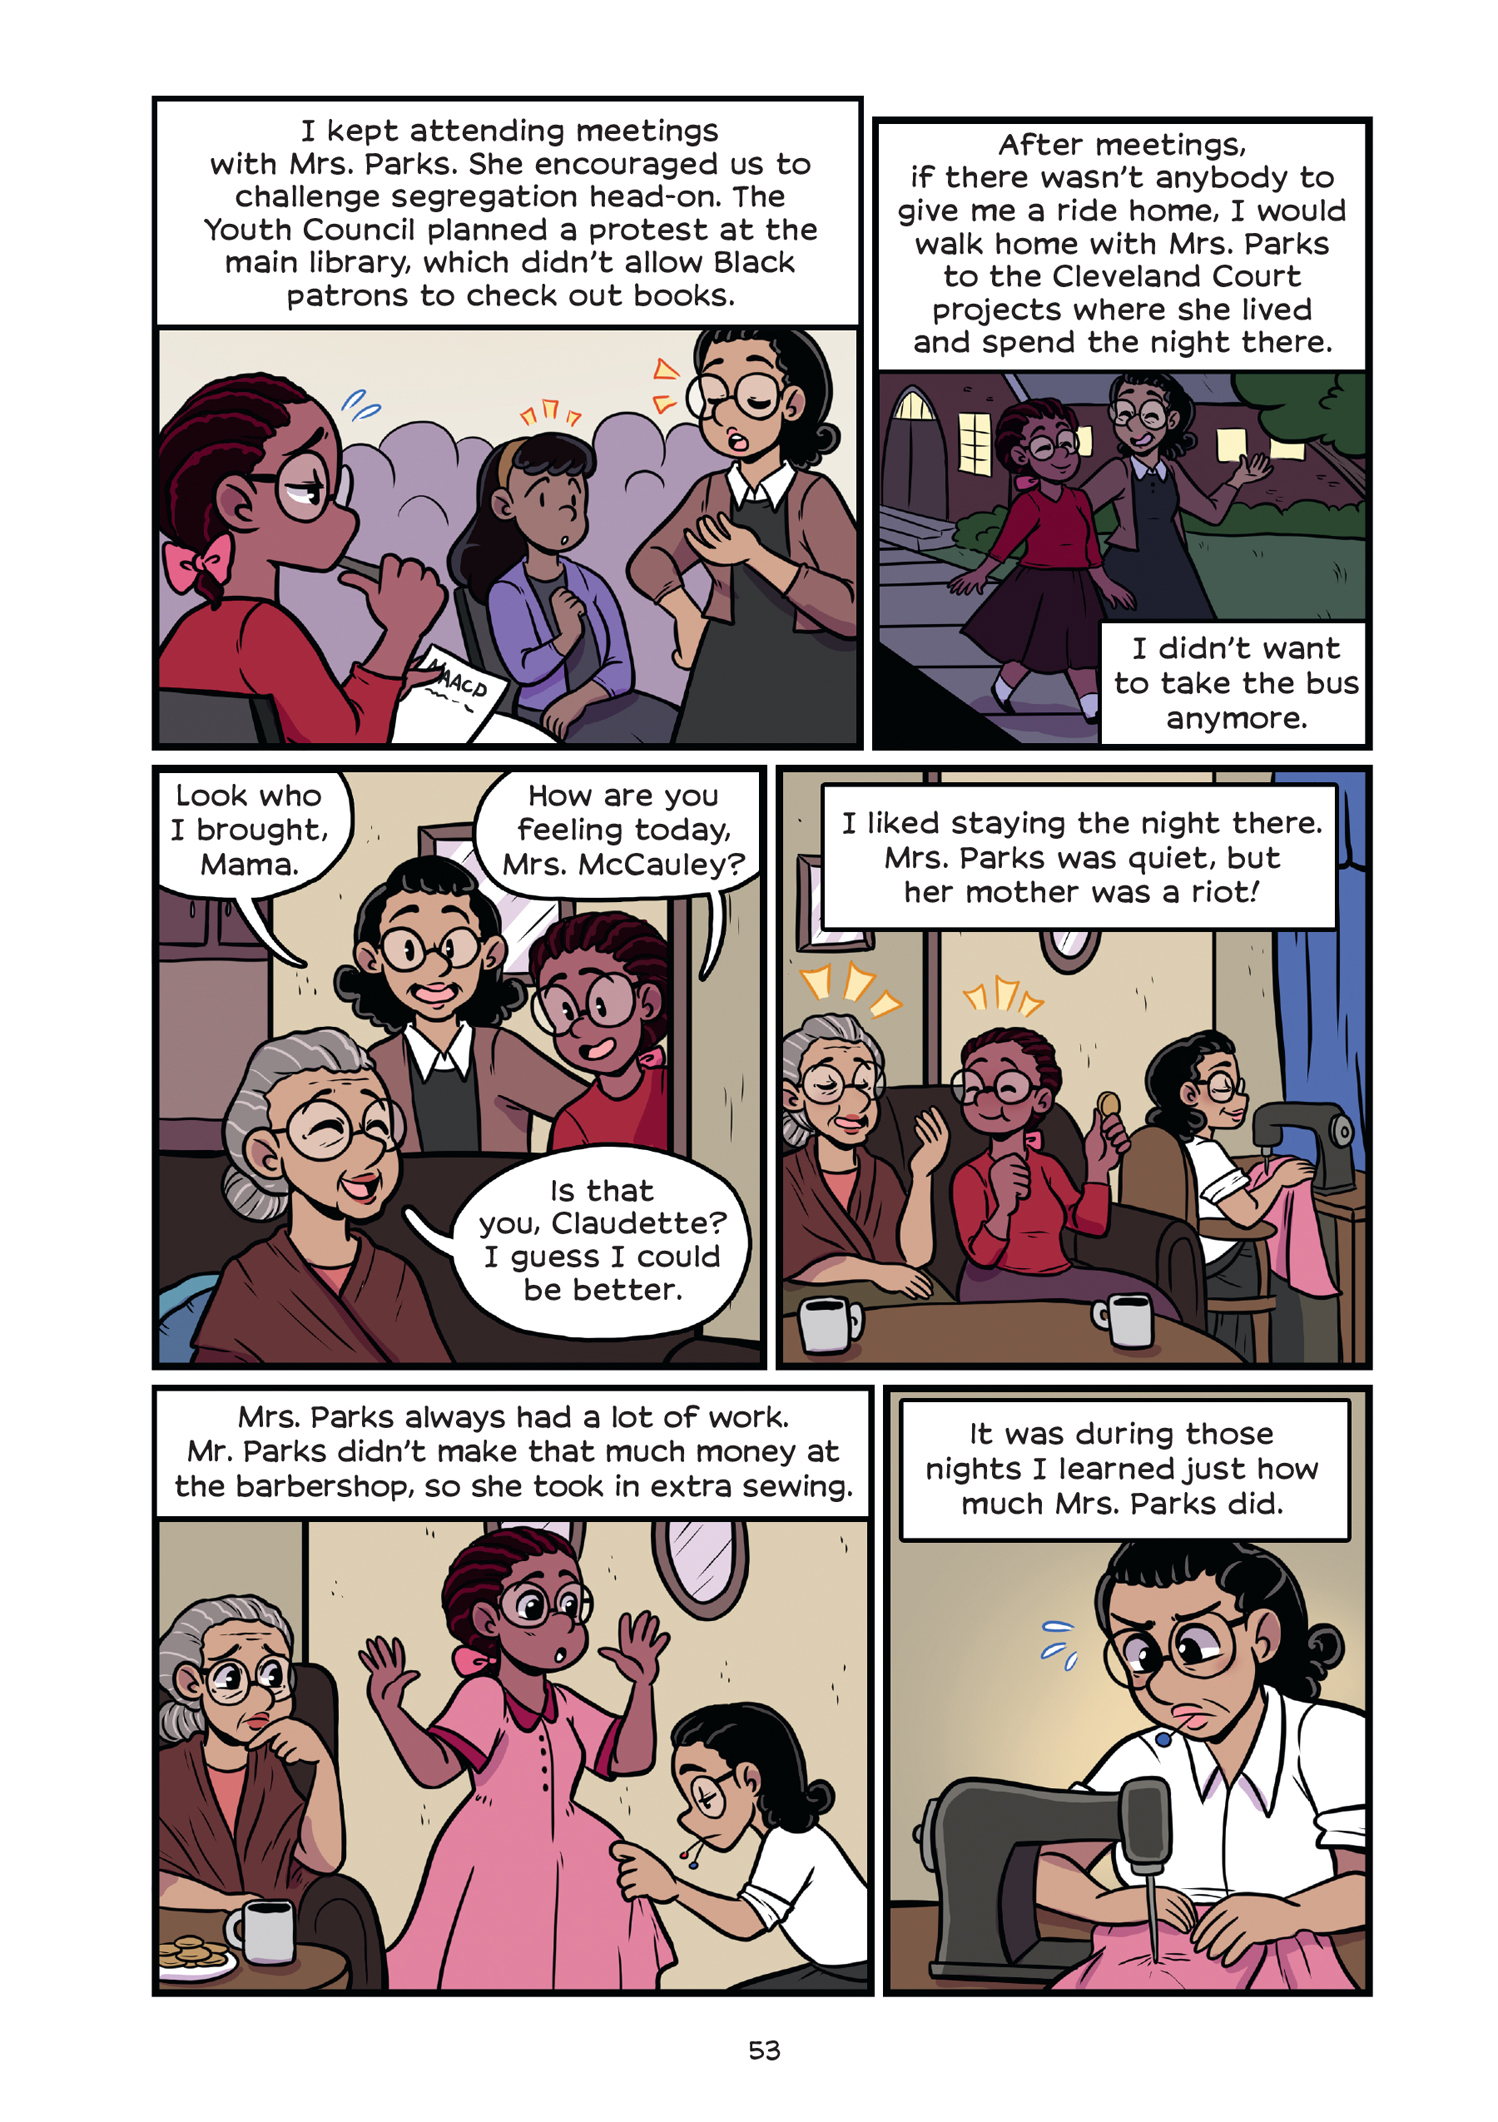 Read online History Comics comic -  Issue # Rosa Parks & Claudette Colvin - Civil Rights Heroes - 58